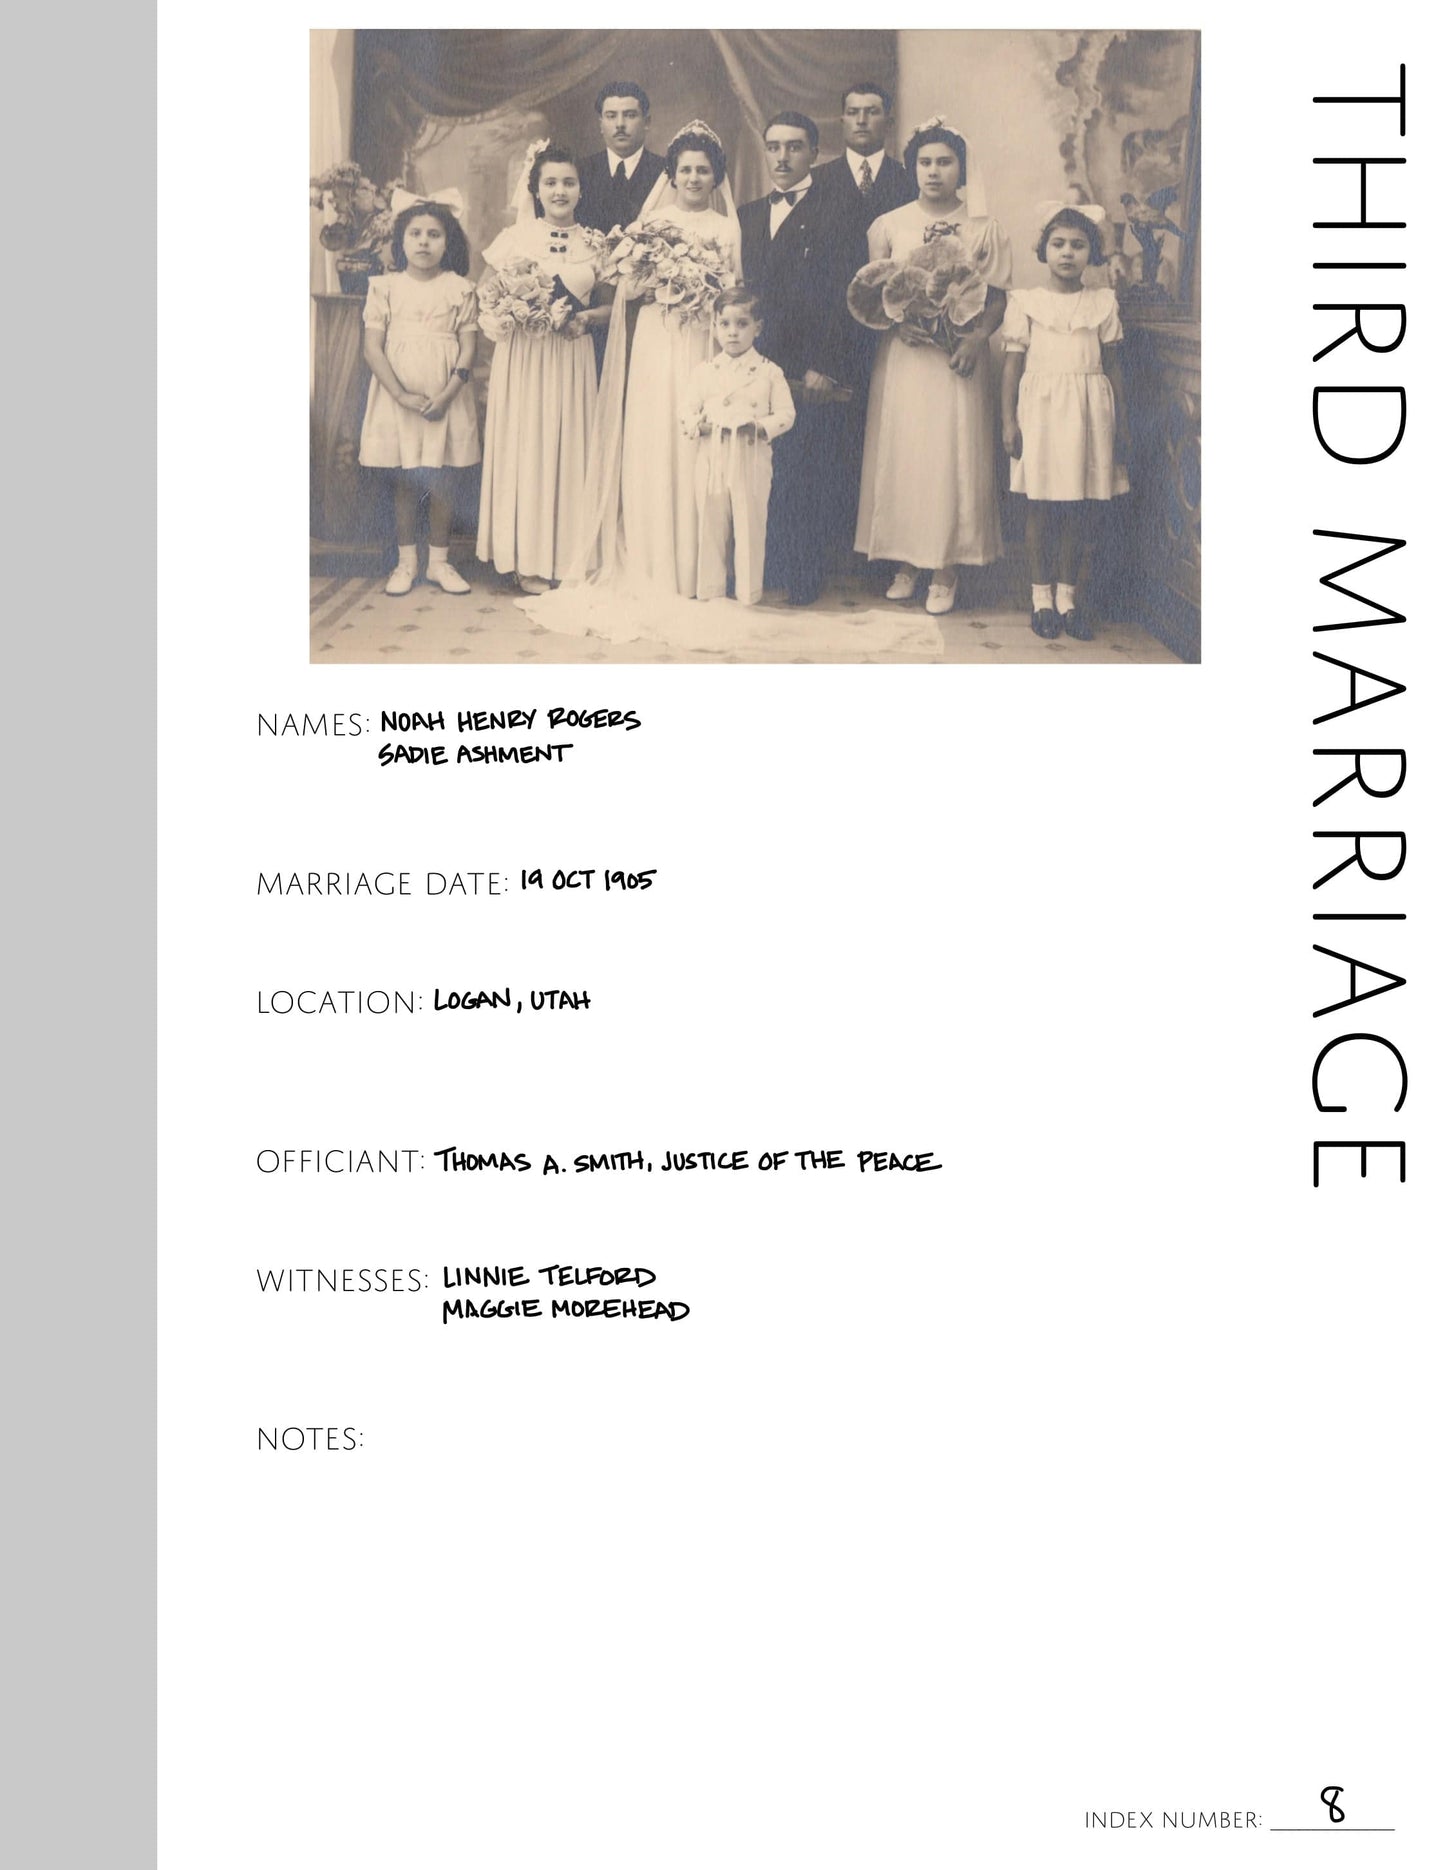 3rd Marriage Records Page: Printable Genealogy Form (Digital Download)